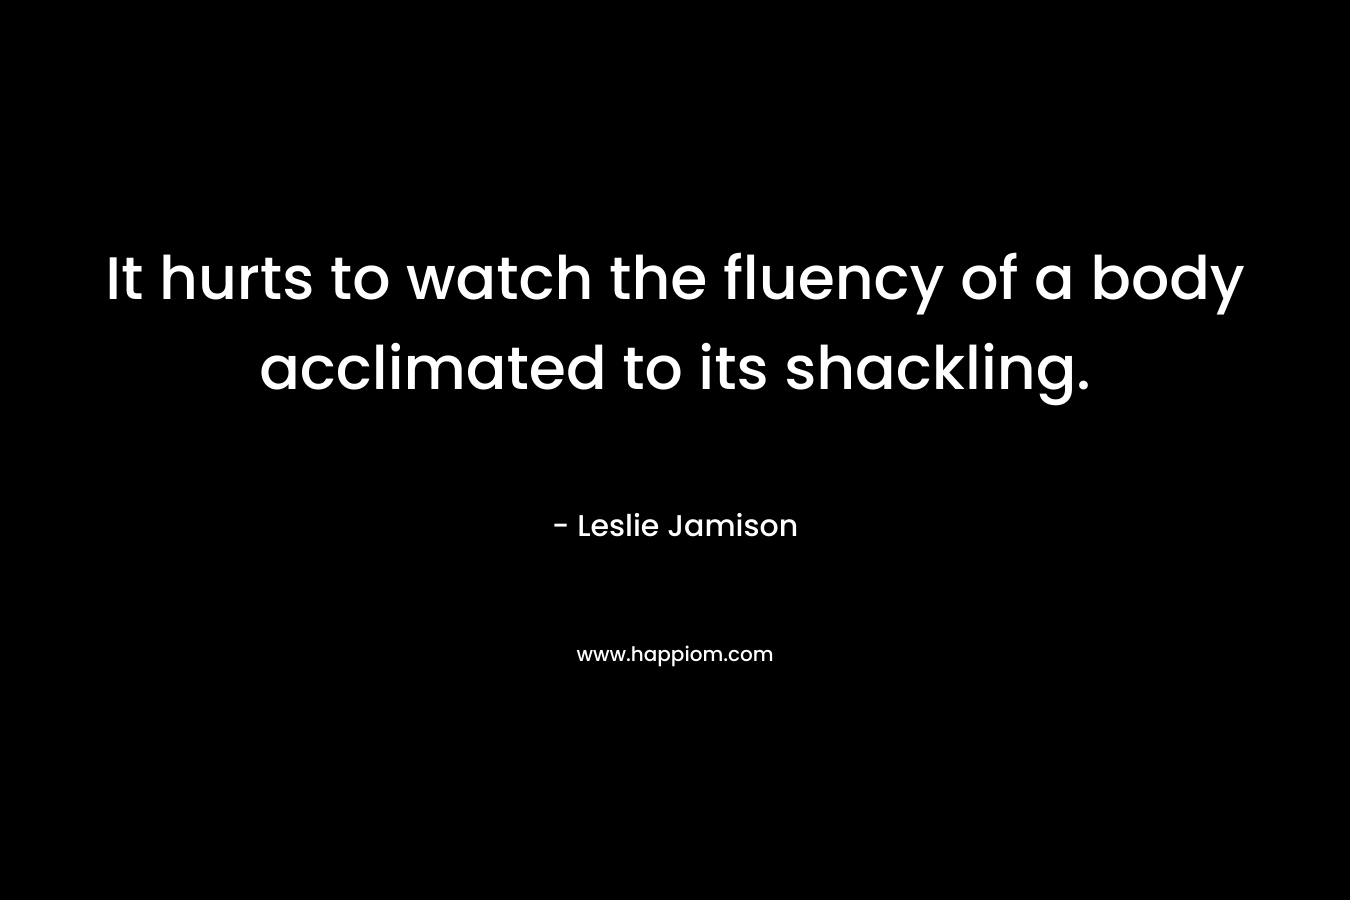 It hurts to watch the fluency of a body acclimated to its shackling. – Leslie Jamison